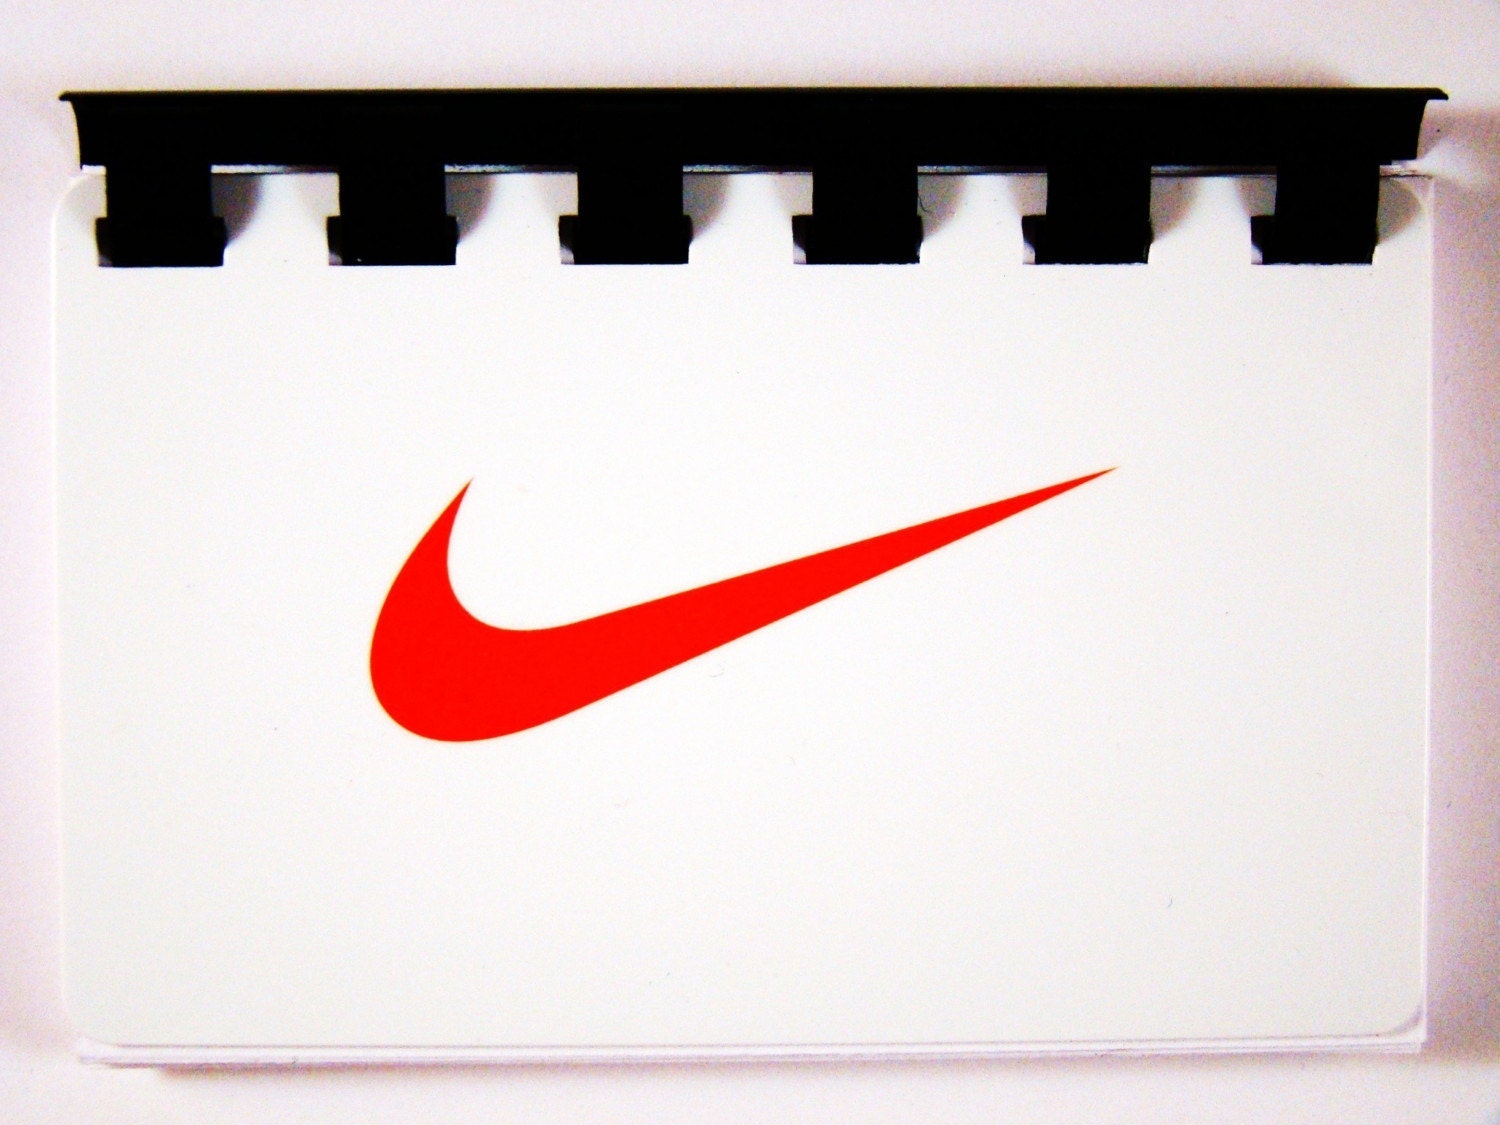 Nike Giftcard  Notebook  ----  No Value on Card -- Novelty Purposes Only